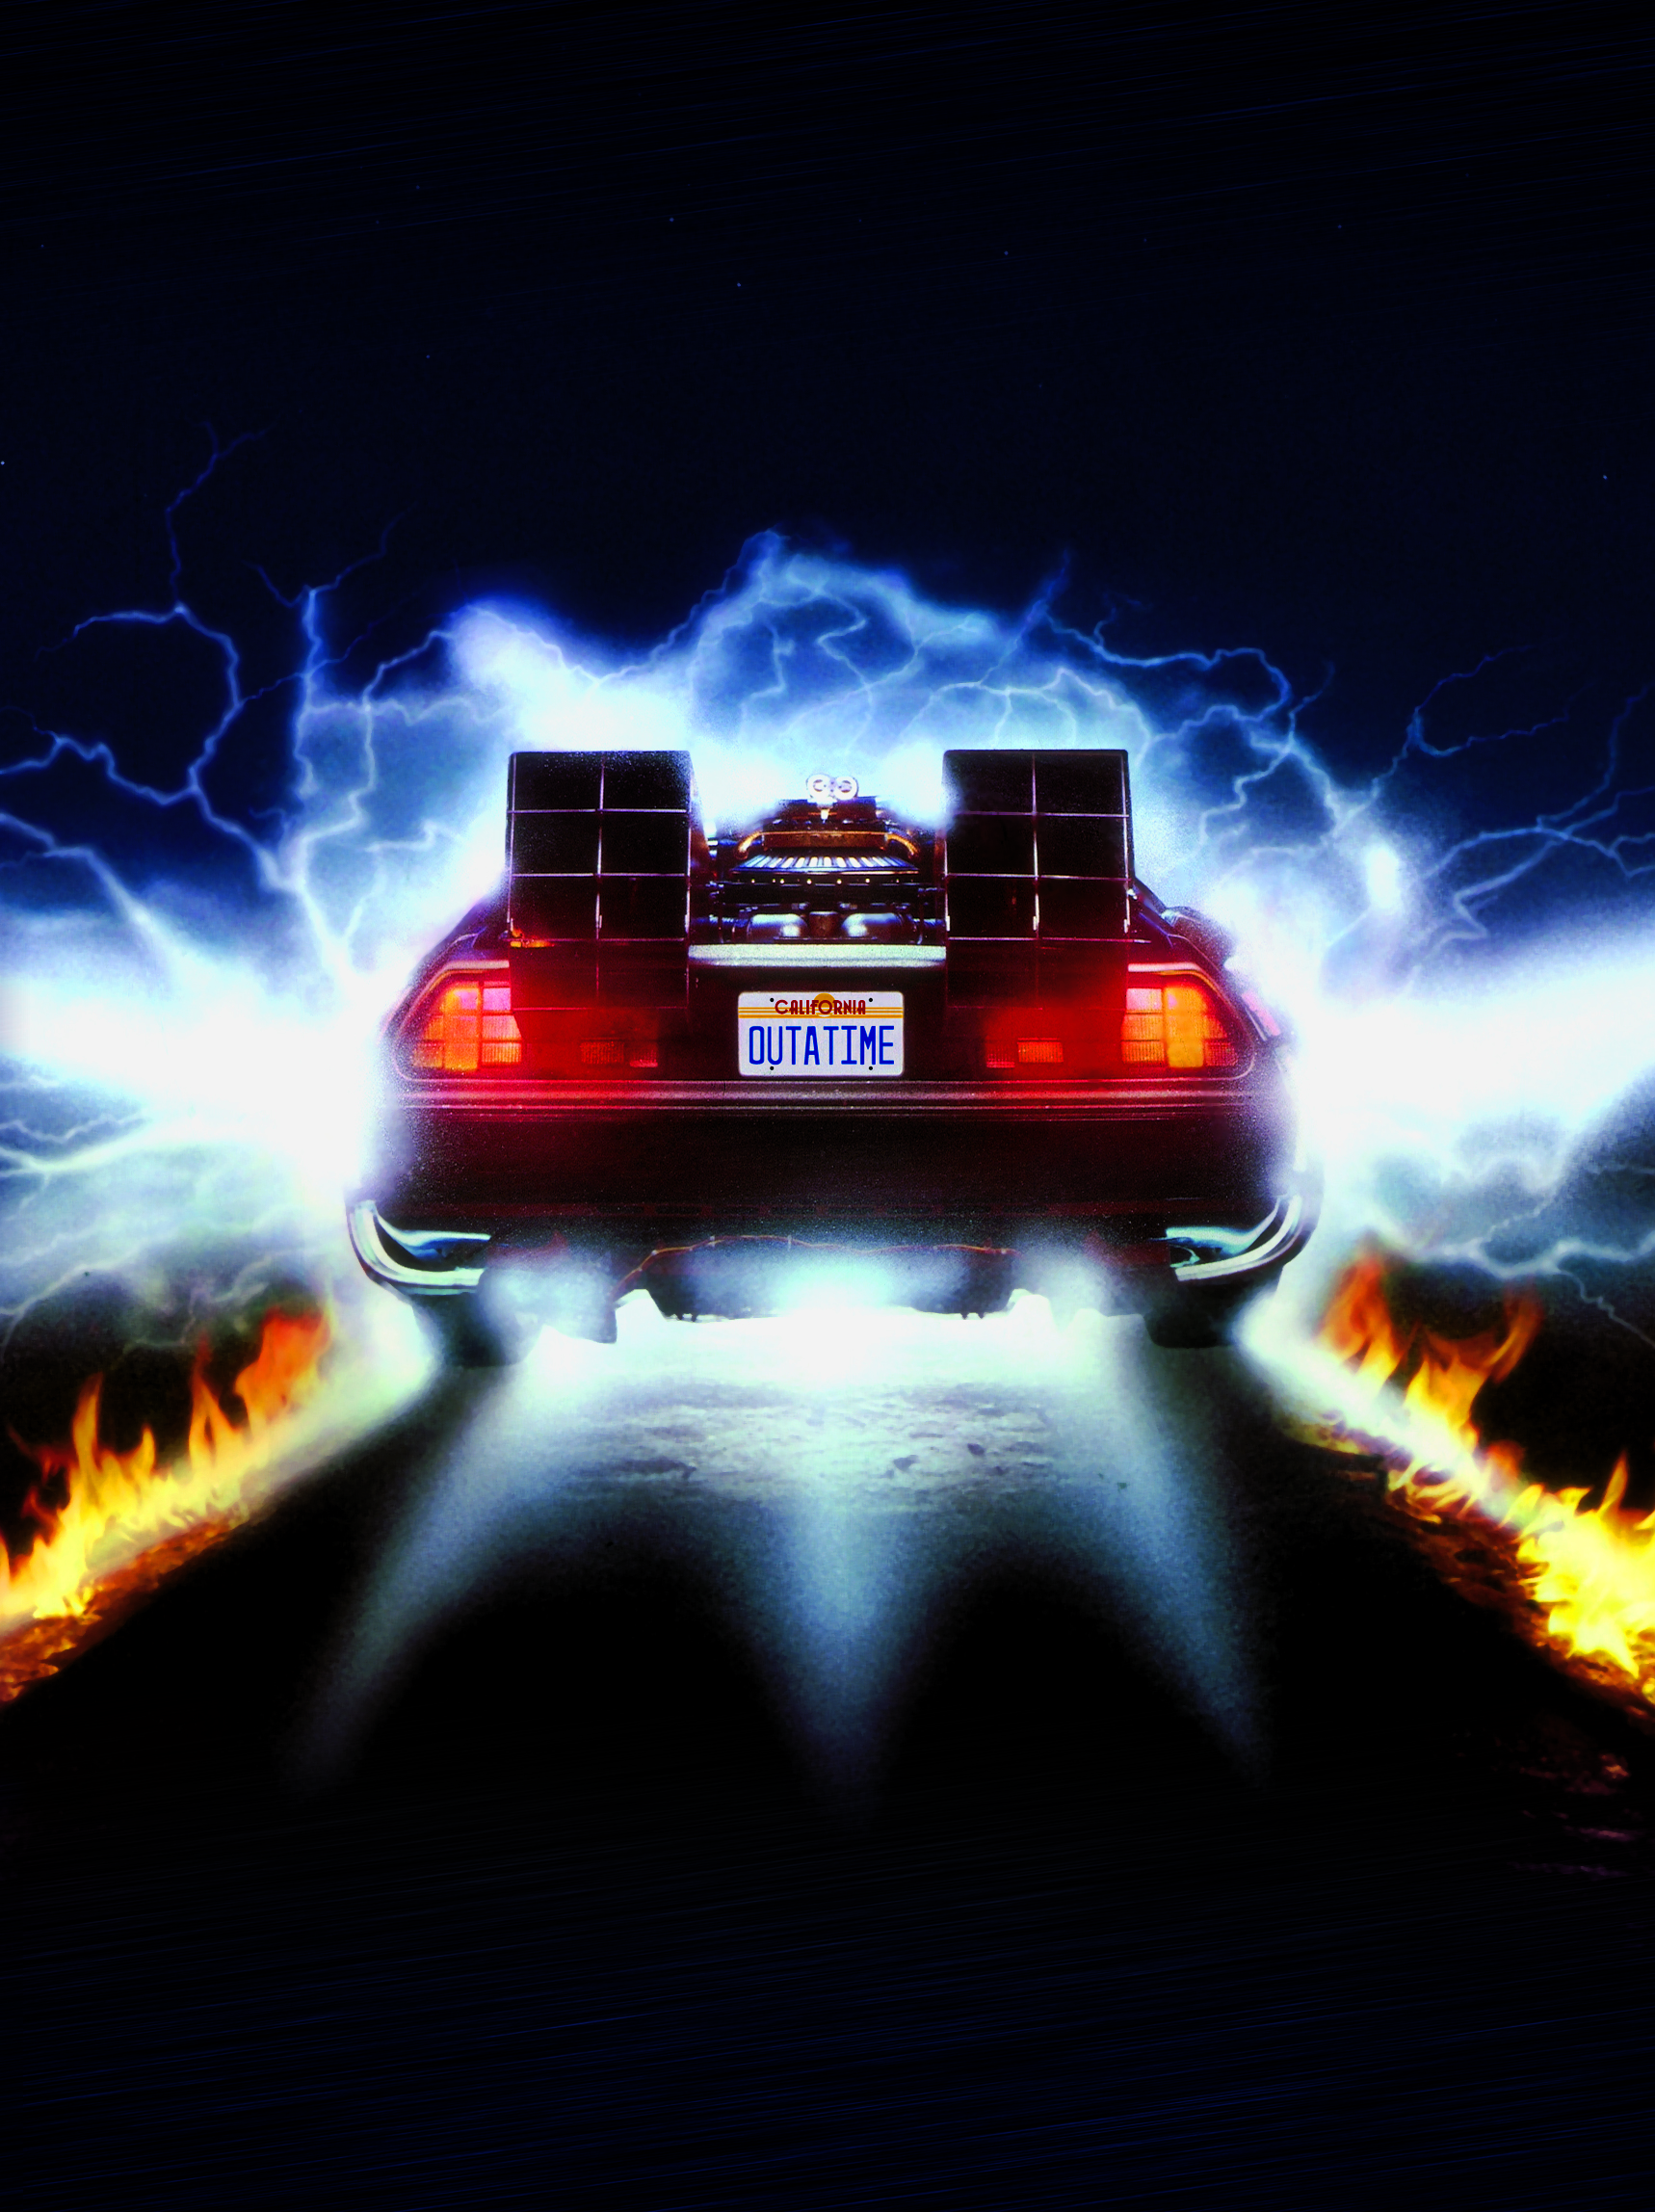 Back to the Future poster featuring the back of the DeLorean and its license plate saying "OUTATIME"